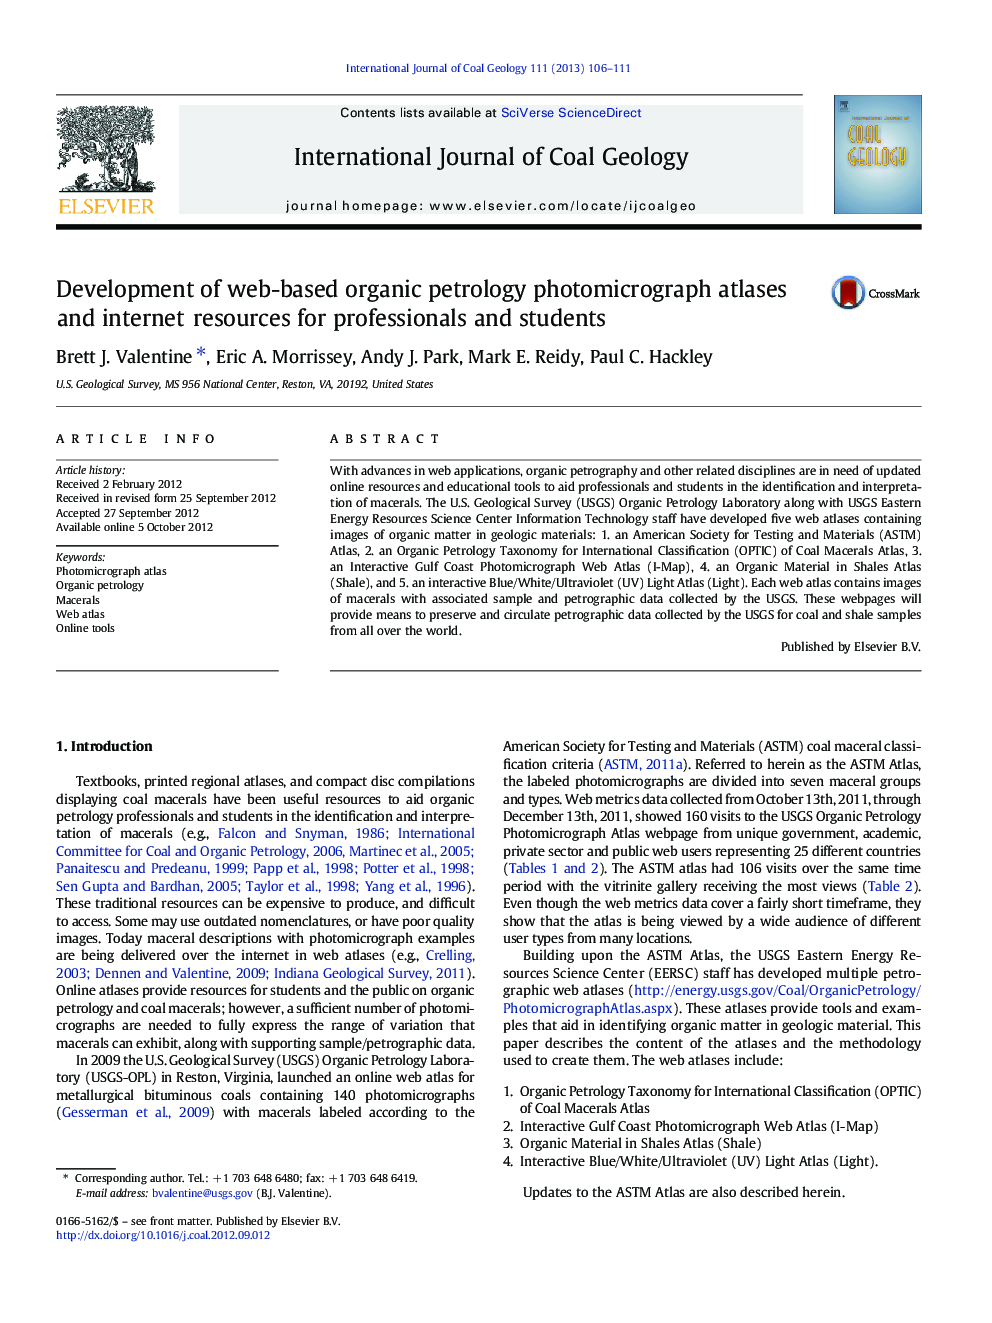 Development of web-based organic petrology photomicrograph atlases and internet resources for professionals and students